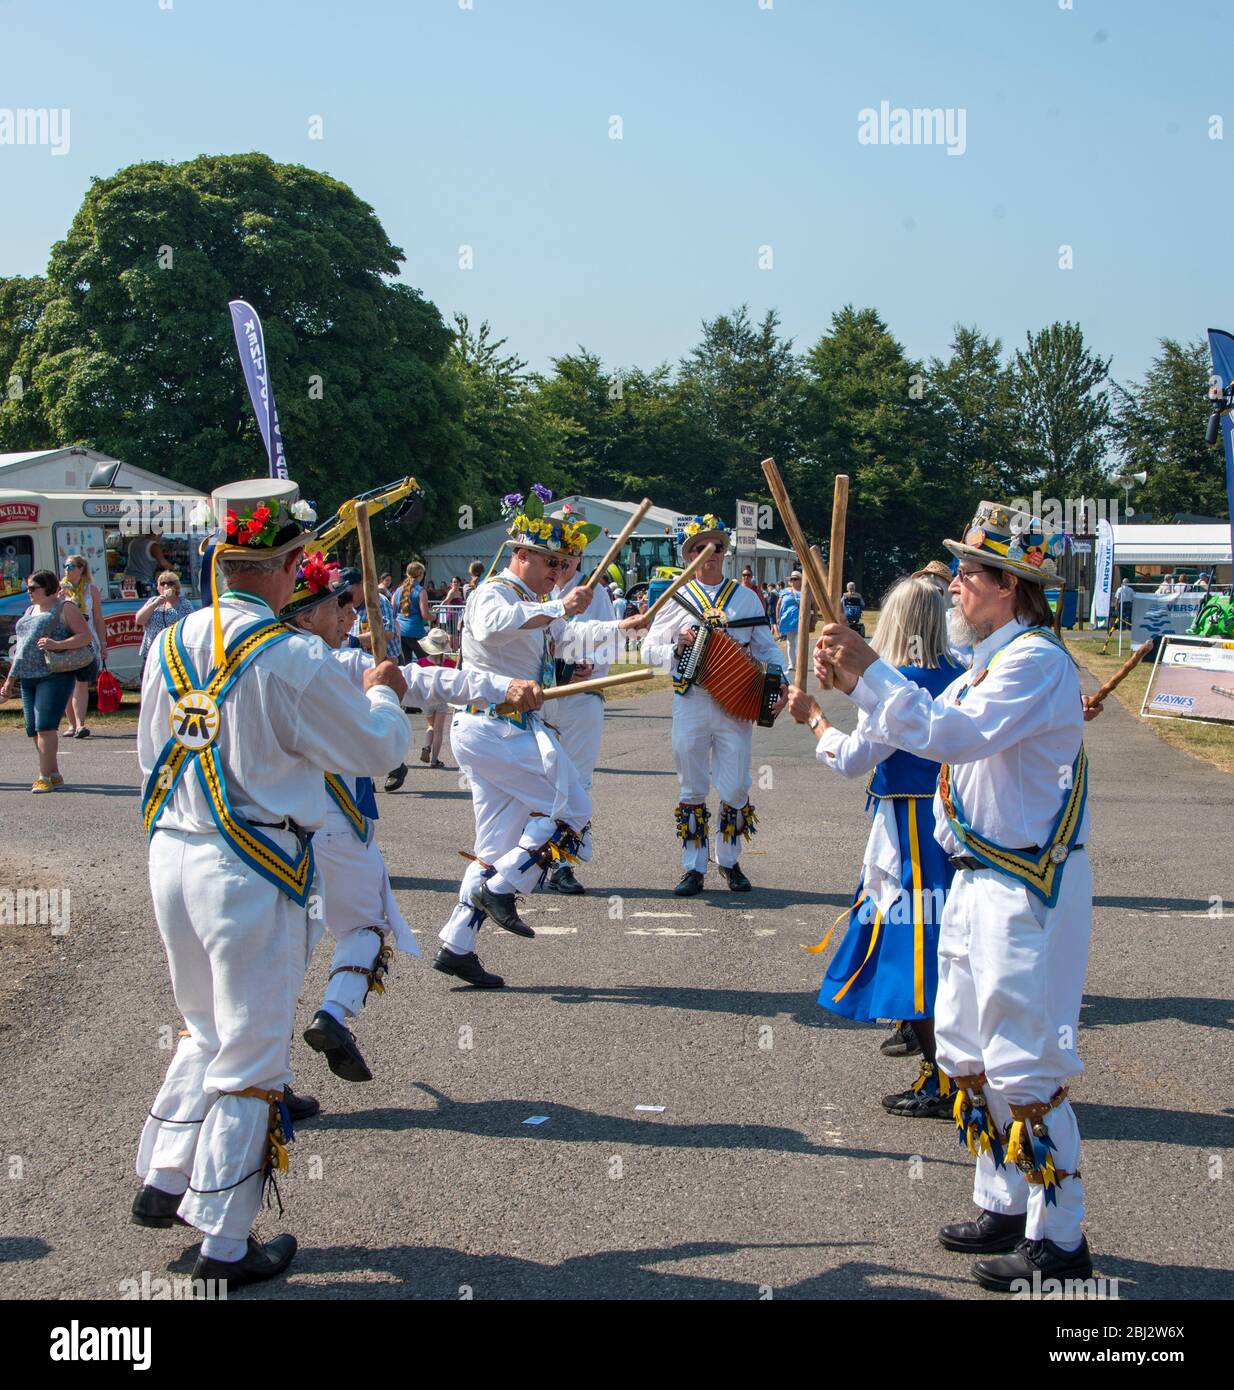 KENT COUNTY SHOW,KENT,UK- JULY 6 2018: Morris Dancers perform at the annual Kent County Show in the UK. Morris dancing is a form of English folk dance Stock Photo